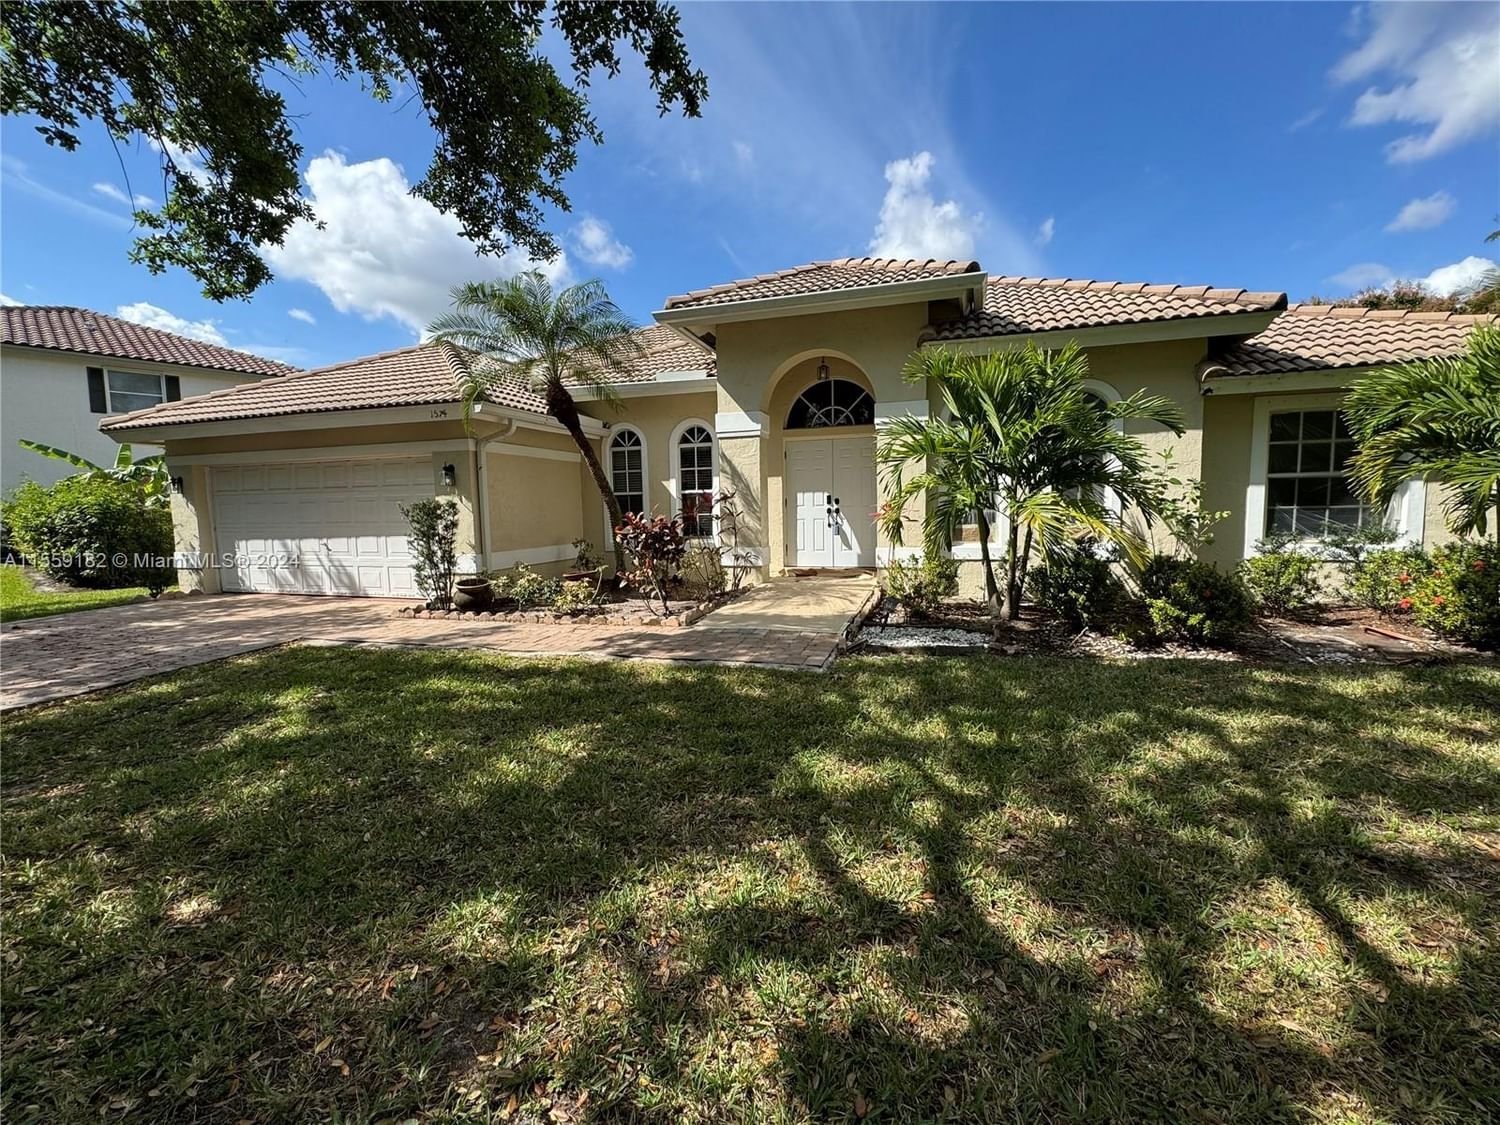 Real estate property located at 1574 103 Ter, Broward County, MAPLE WOOD ADDITION, Coral Springs, FL